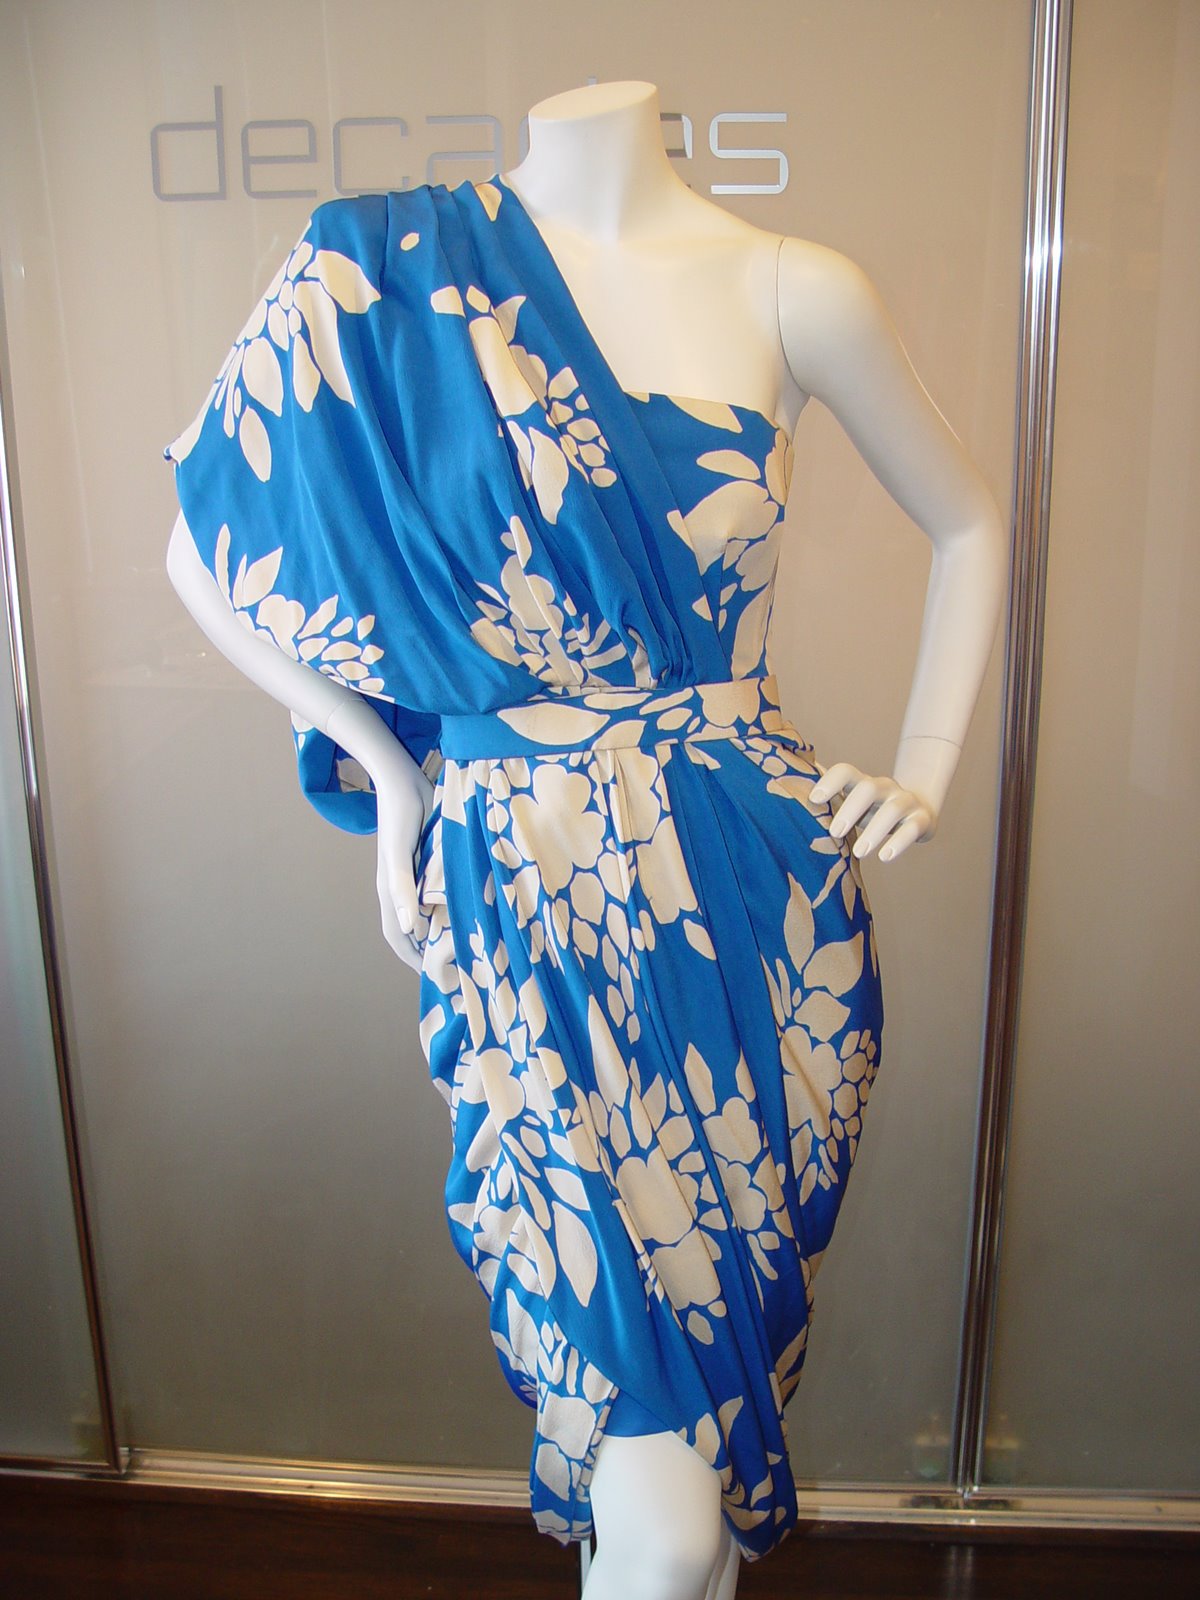 [PIERRE+CARDIN+COUTURE+TROPICAL+ONE+SHOUDLER+DRESS+WITH+BLUE+AND+WHITE+FLORAL+PRINT+C+EARLY+80S.JPG.JPG]